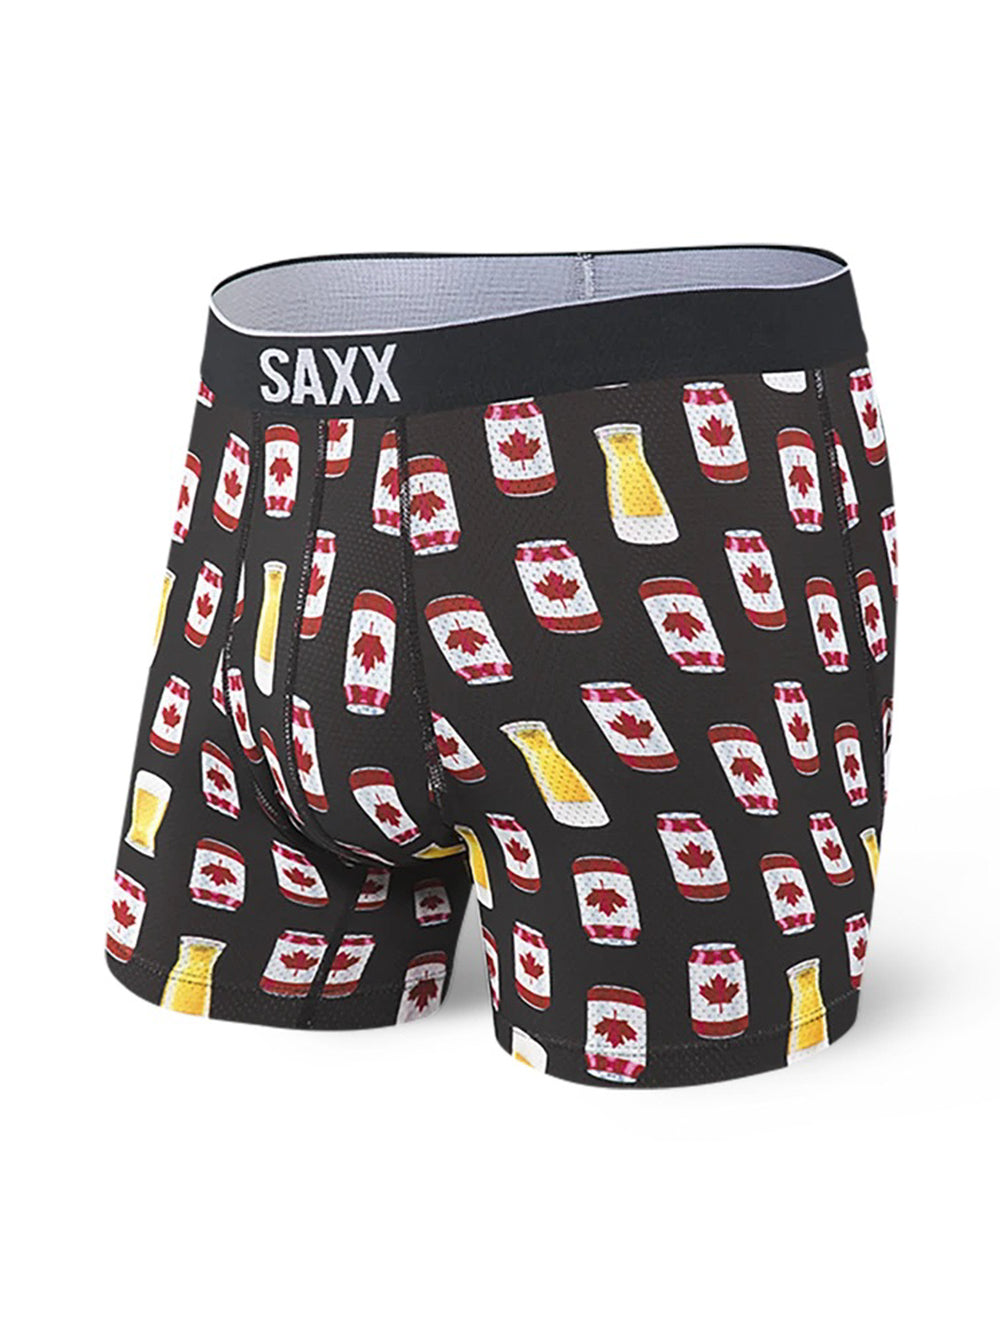 SAXX VOLT BOXER BRIEF - CANADIAN LAGER - CLEARANCE